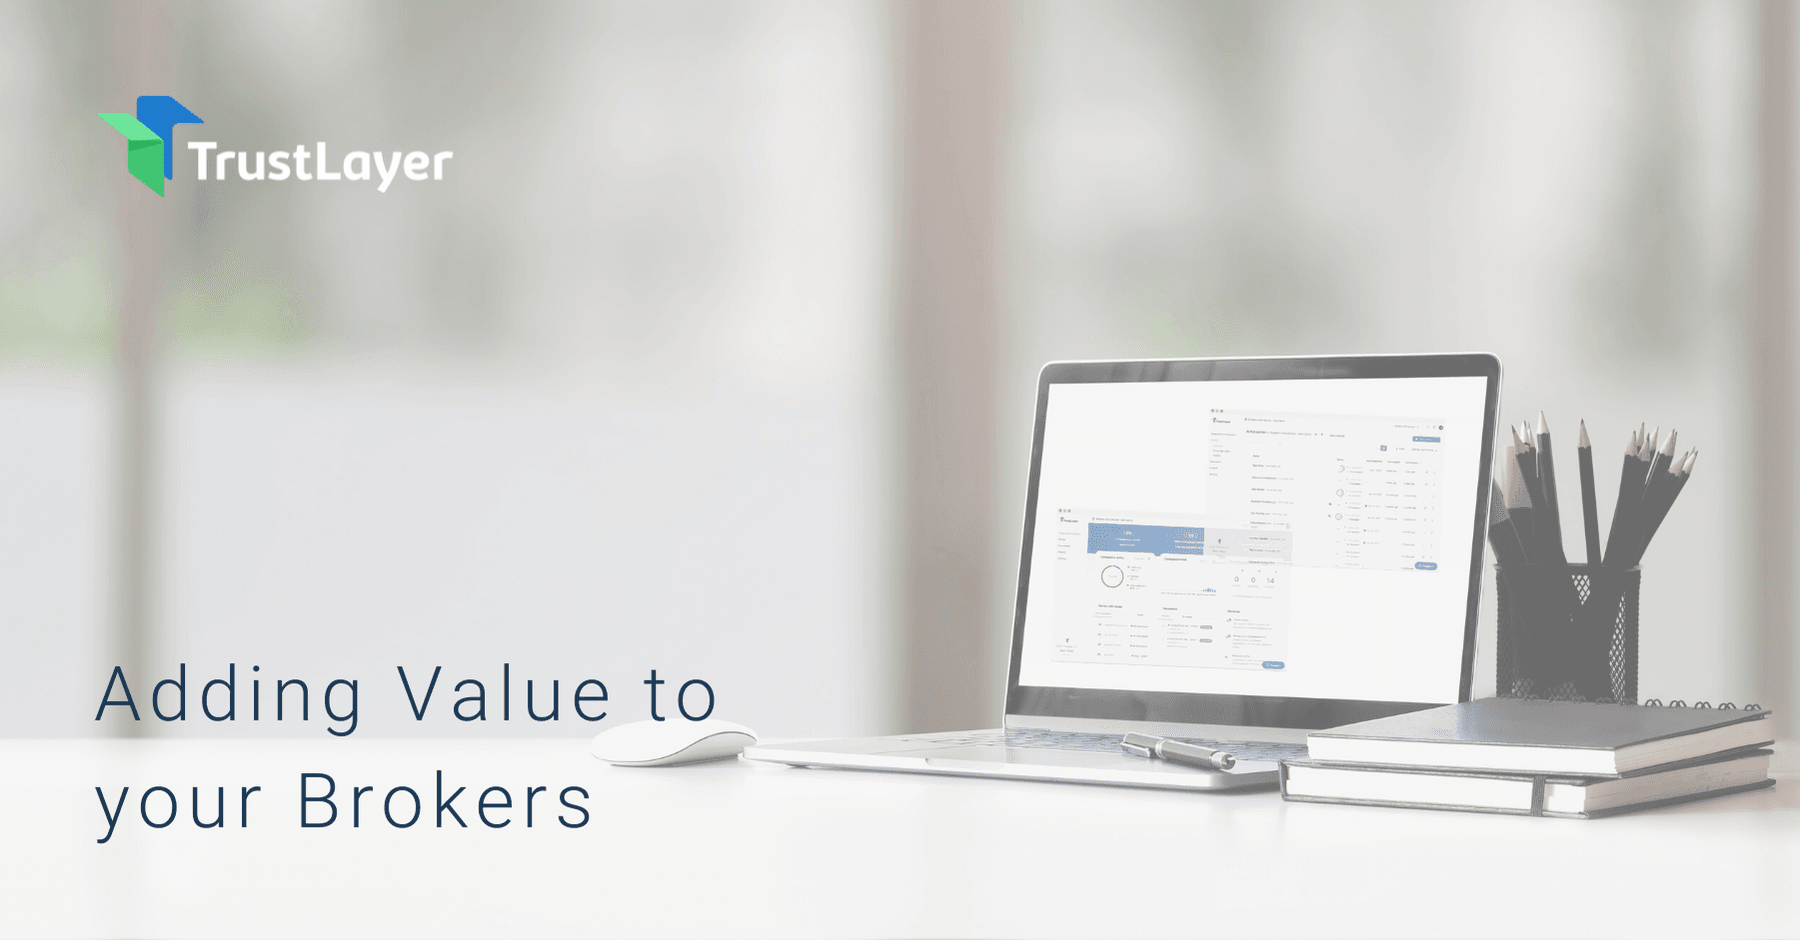 7 Ways TrustLayer Adds Value to your Brokers